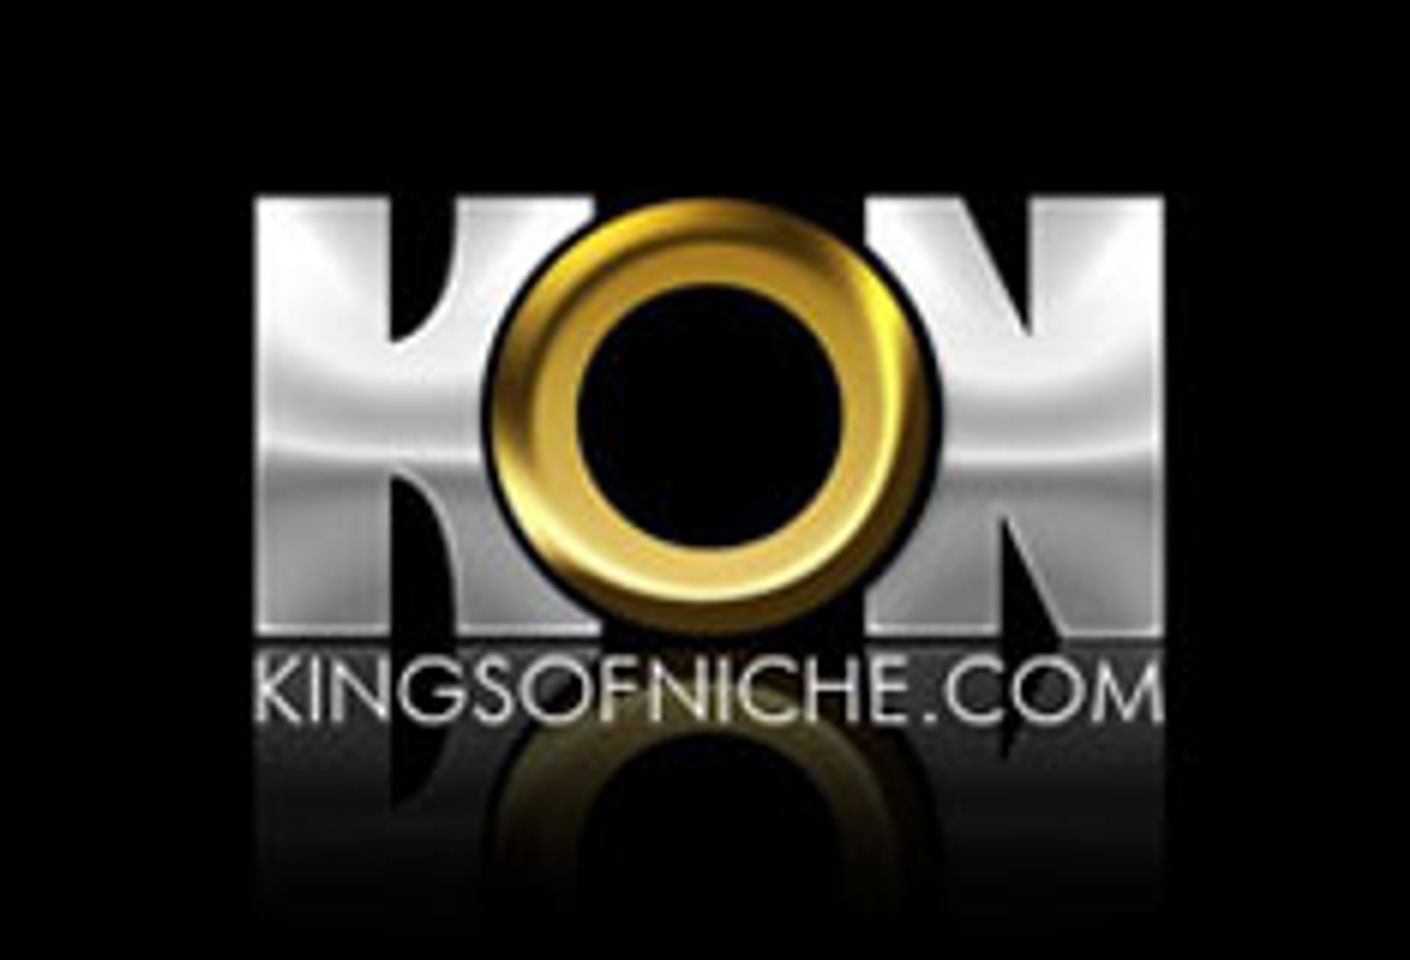 Kings Of Niche Launches with 80 Percent Revshare Special